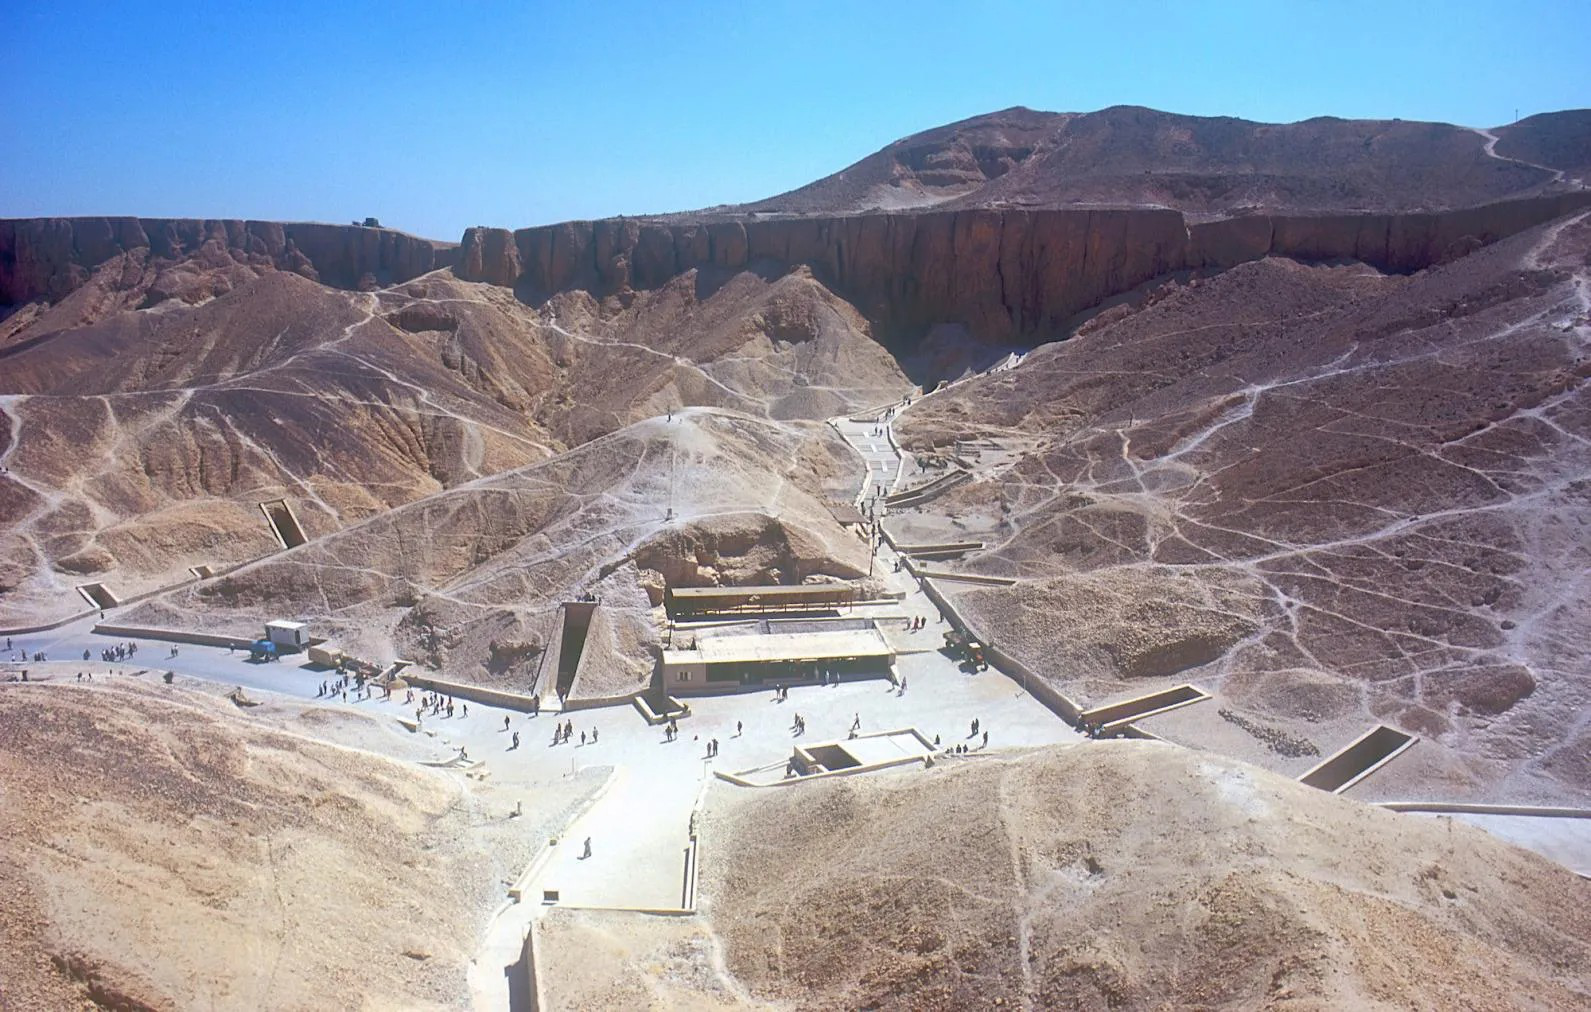 A Journey Back in Time: Valley of the Kings Tours